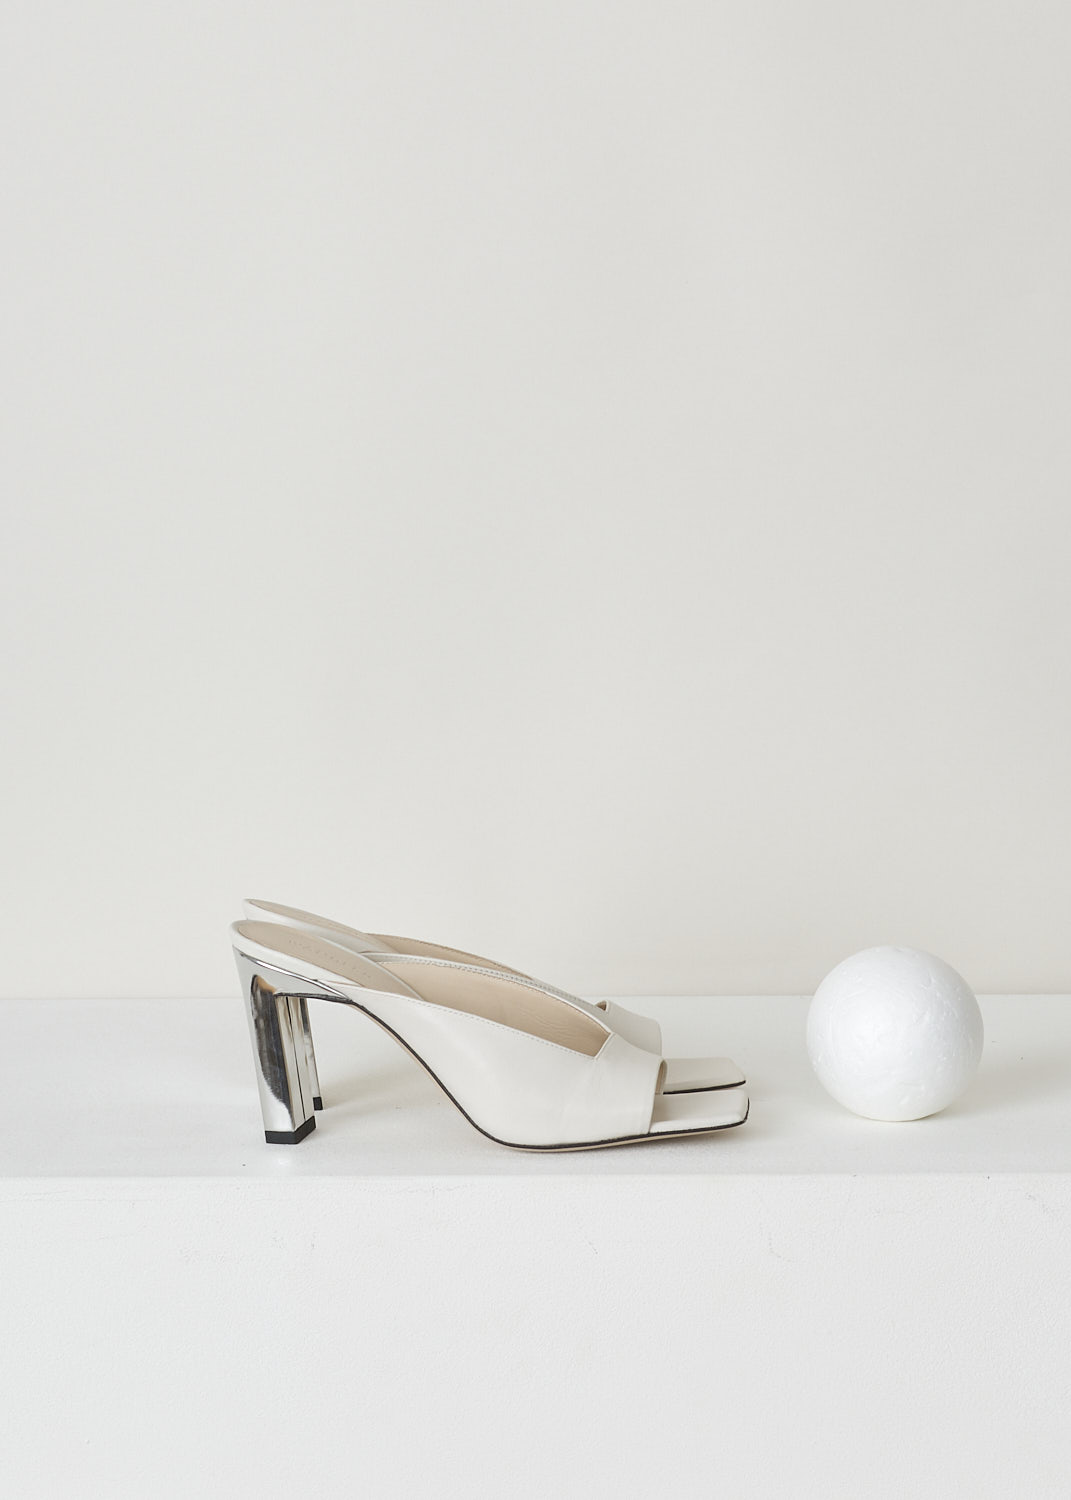 WANDLER, OFF-WHITE HEELED ISA SANDALS, 22204_101204_1082_ISA_SANDAL_DOVE_MIX, White, Side, These off-white leather slip-on sandals have a square-cut open-toe and a rectangular block heel.
